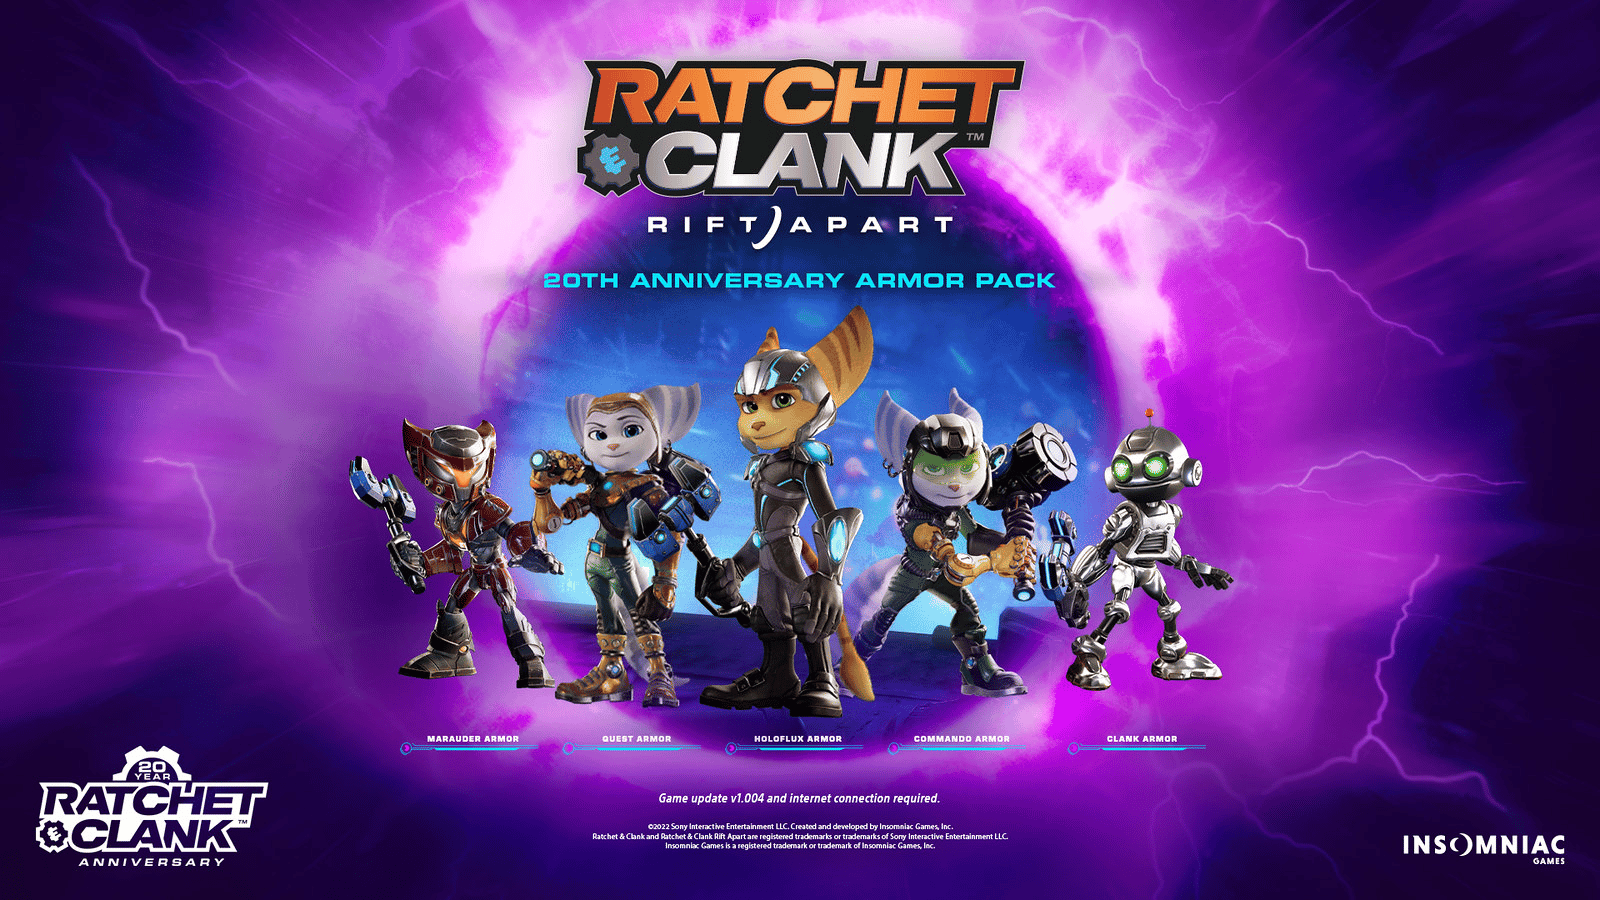 Ratchet & Clank: A Rift Apart Update 1.004 Sneaks Out This November 5